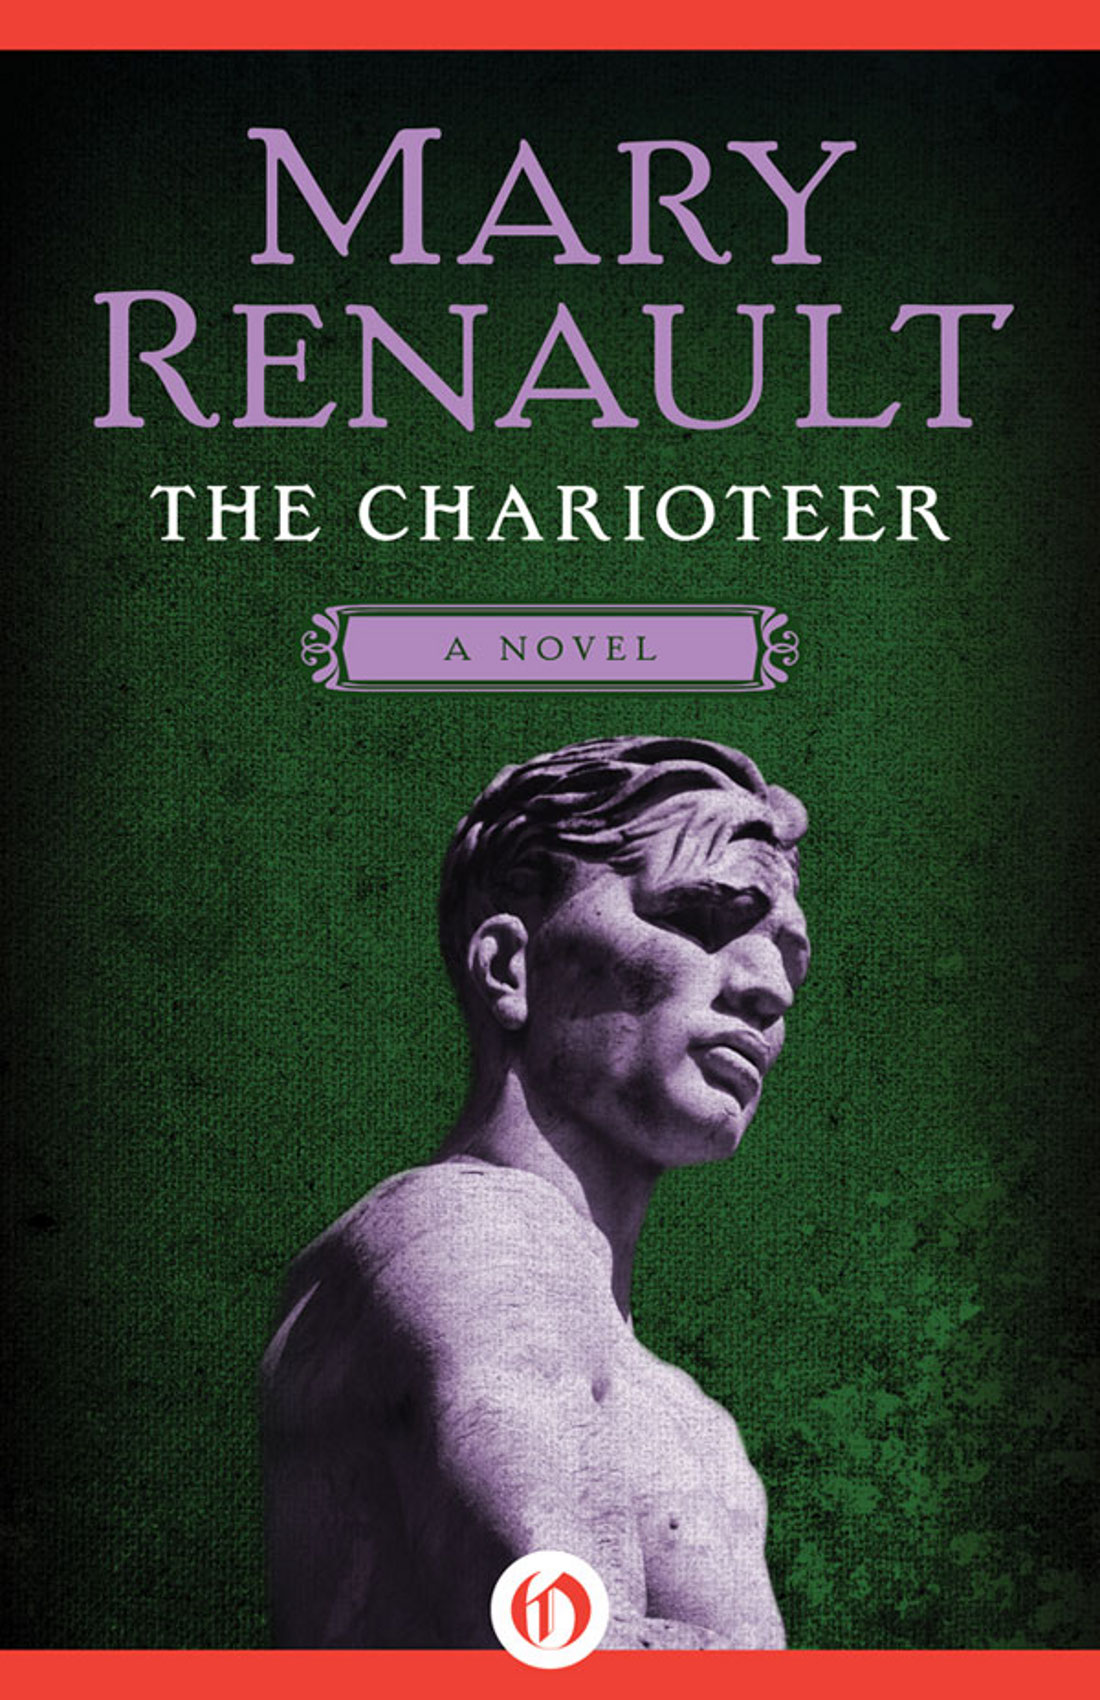 The Charioteer by Mary Renault